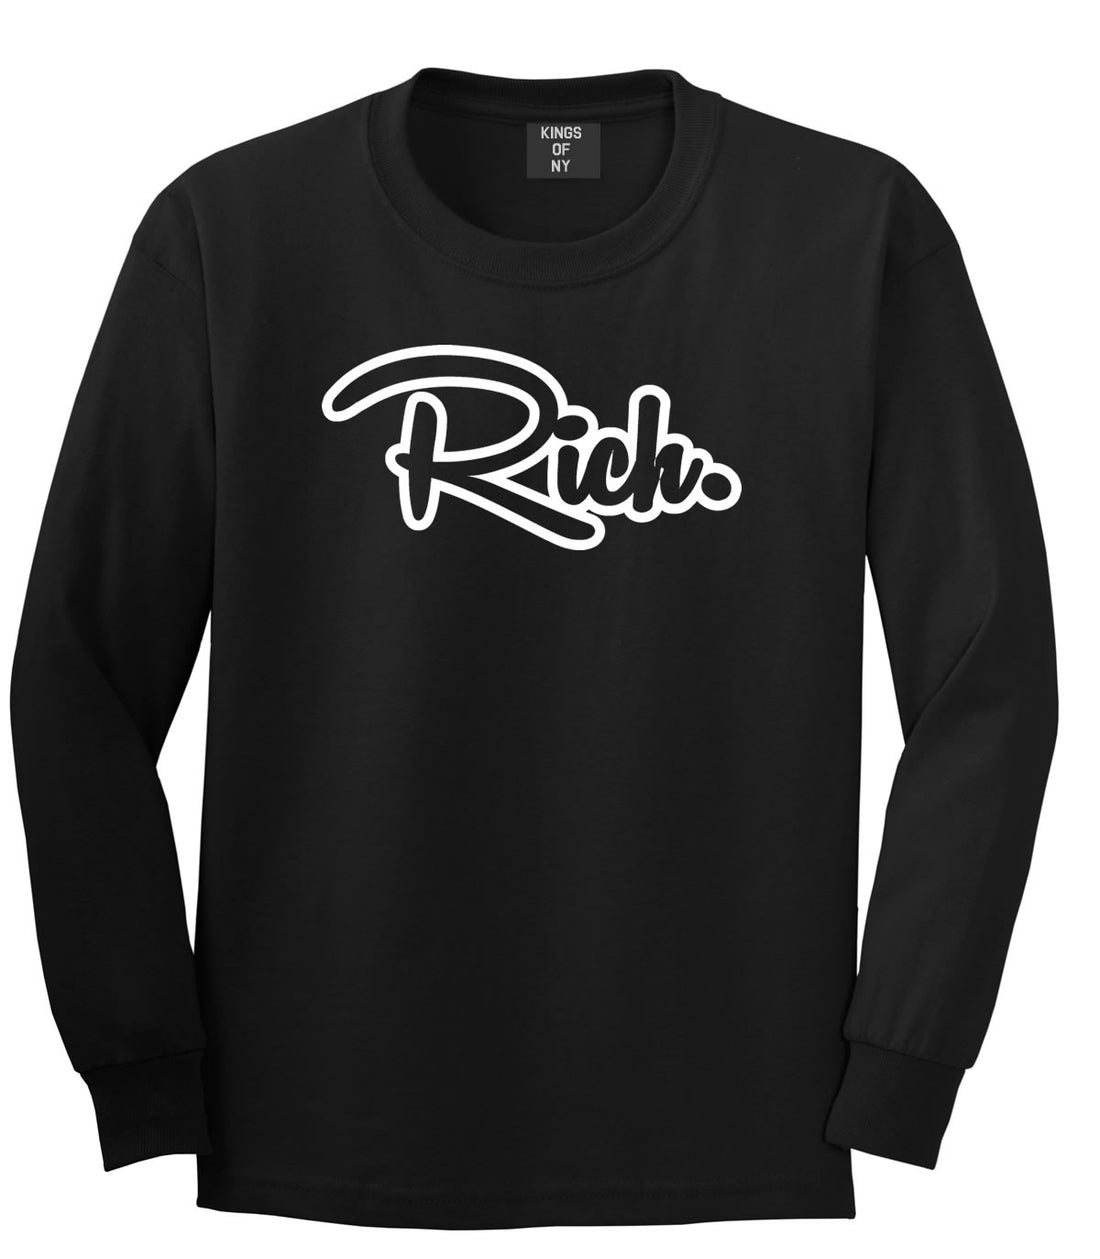 Rich Money Fab Style New York Richie NYC Long Sleeve T-Shirt In Black by Kings Of NY